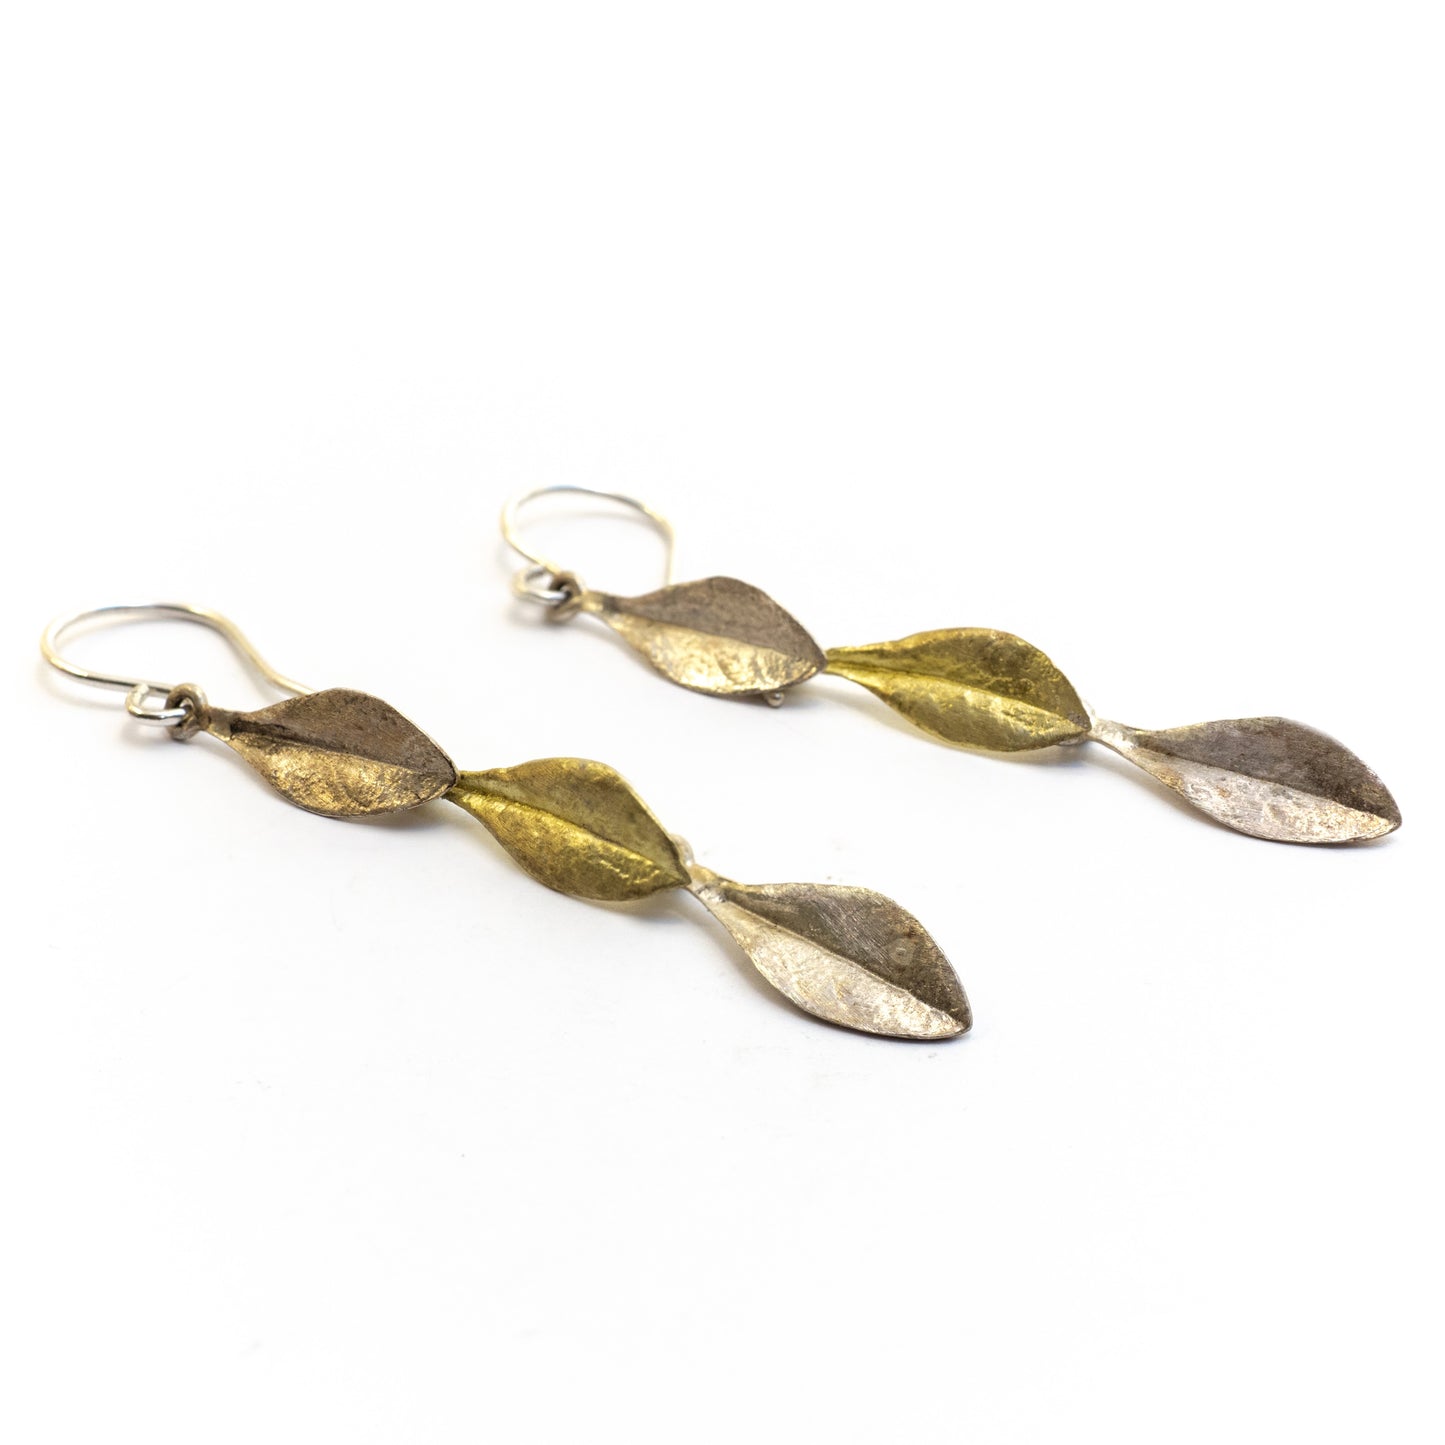 Handmade Sterling Silver and Brass Eugenia Triple Leaf Dangle Earrings - Unique One-of-a-Kind Nature-Inspired Jewelry